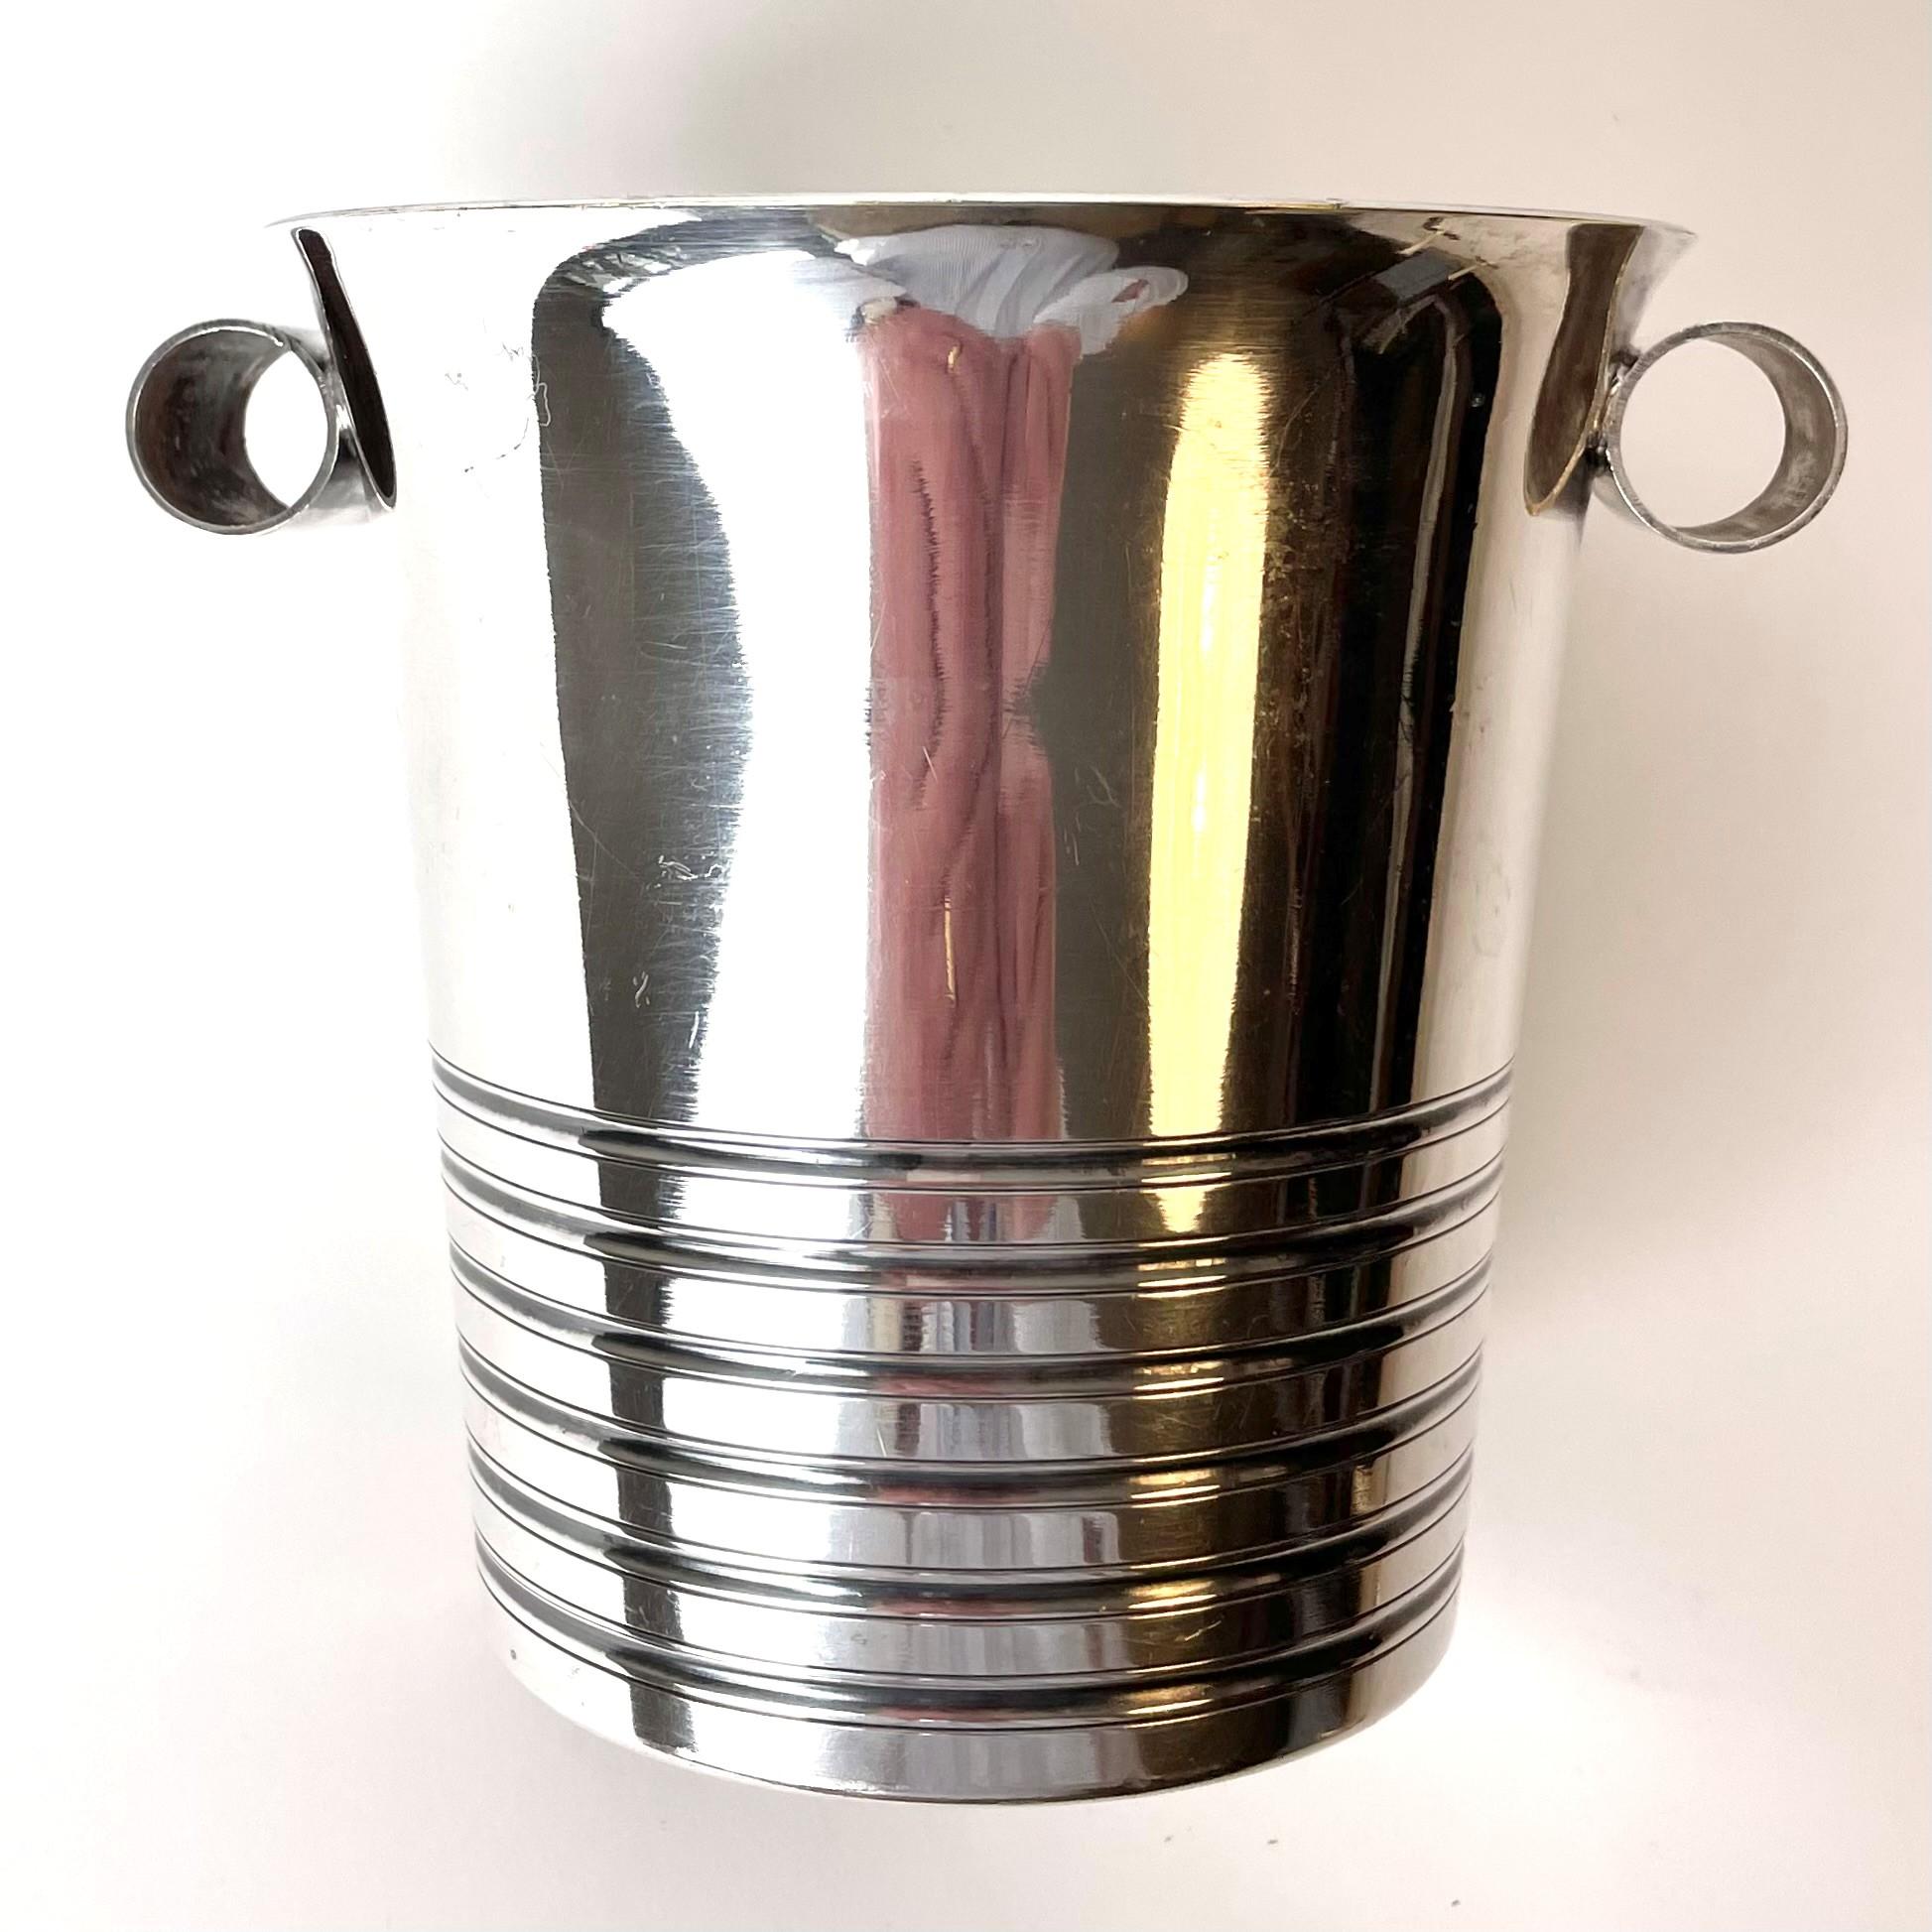 A beautiful silver plated Ice Bucket in Art Deco. Made in France during the the 1920s. Very period design with stripes and decorative handles. 

Wear consistent with age and use.